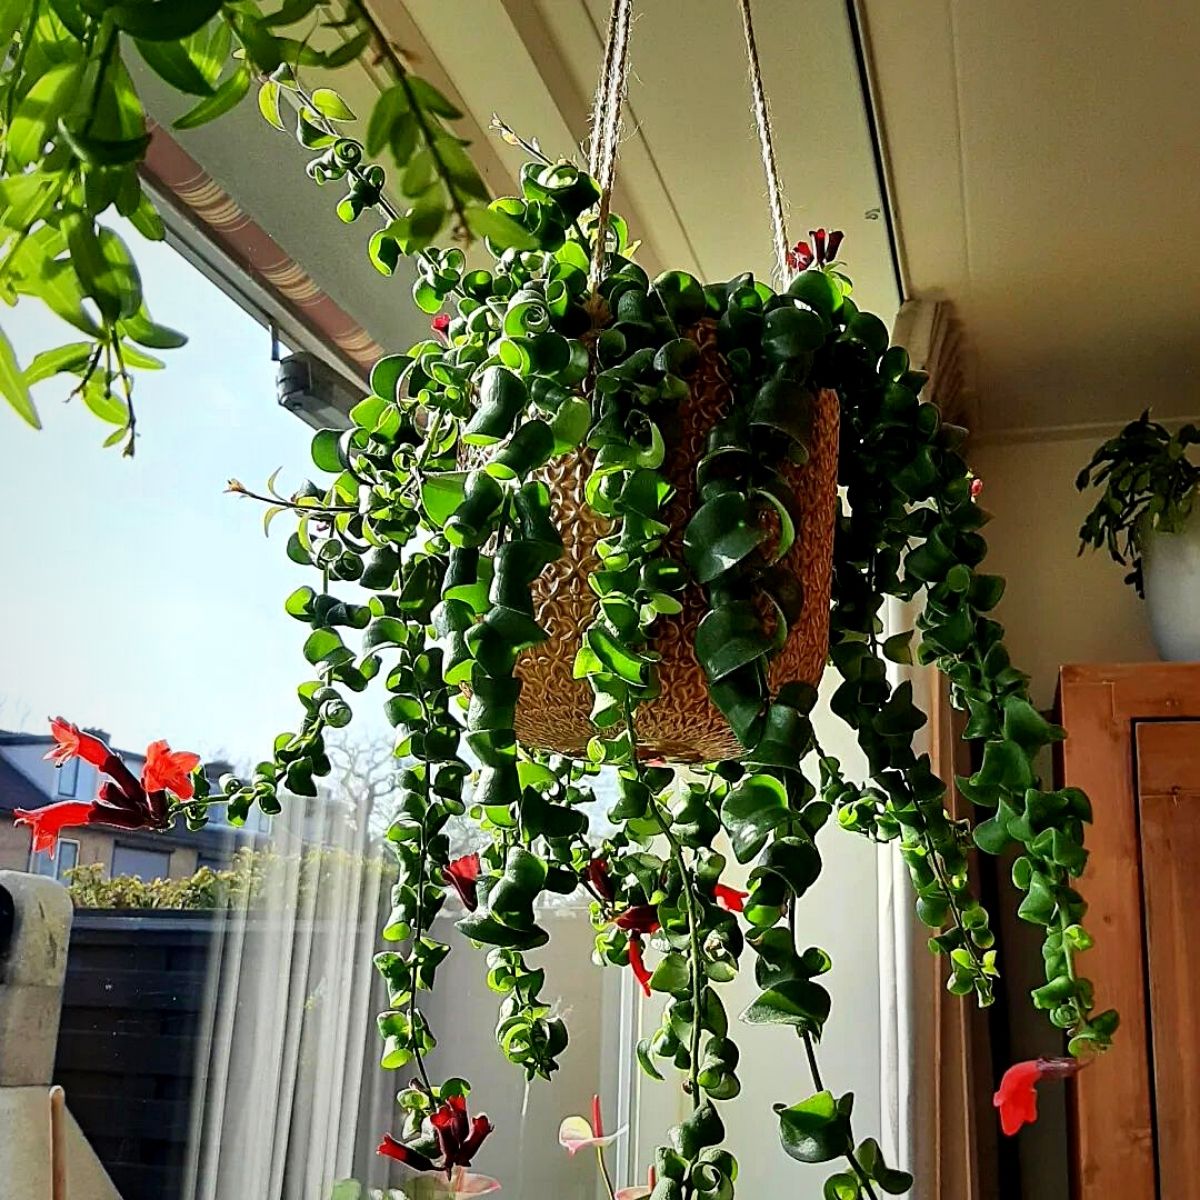 Lipstick plant hanging in a basket